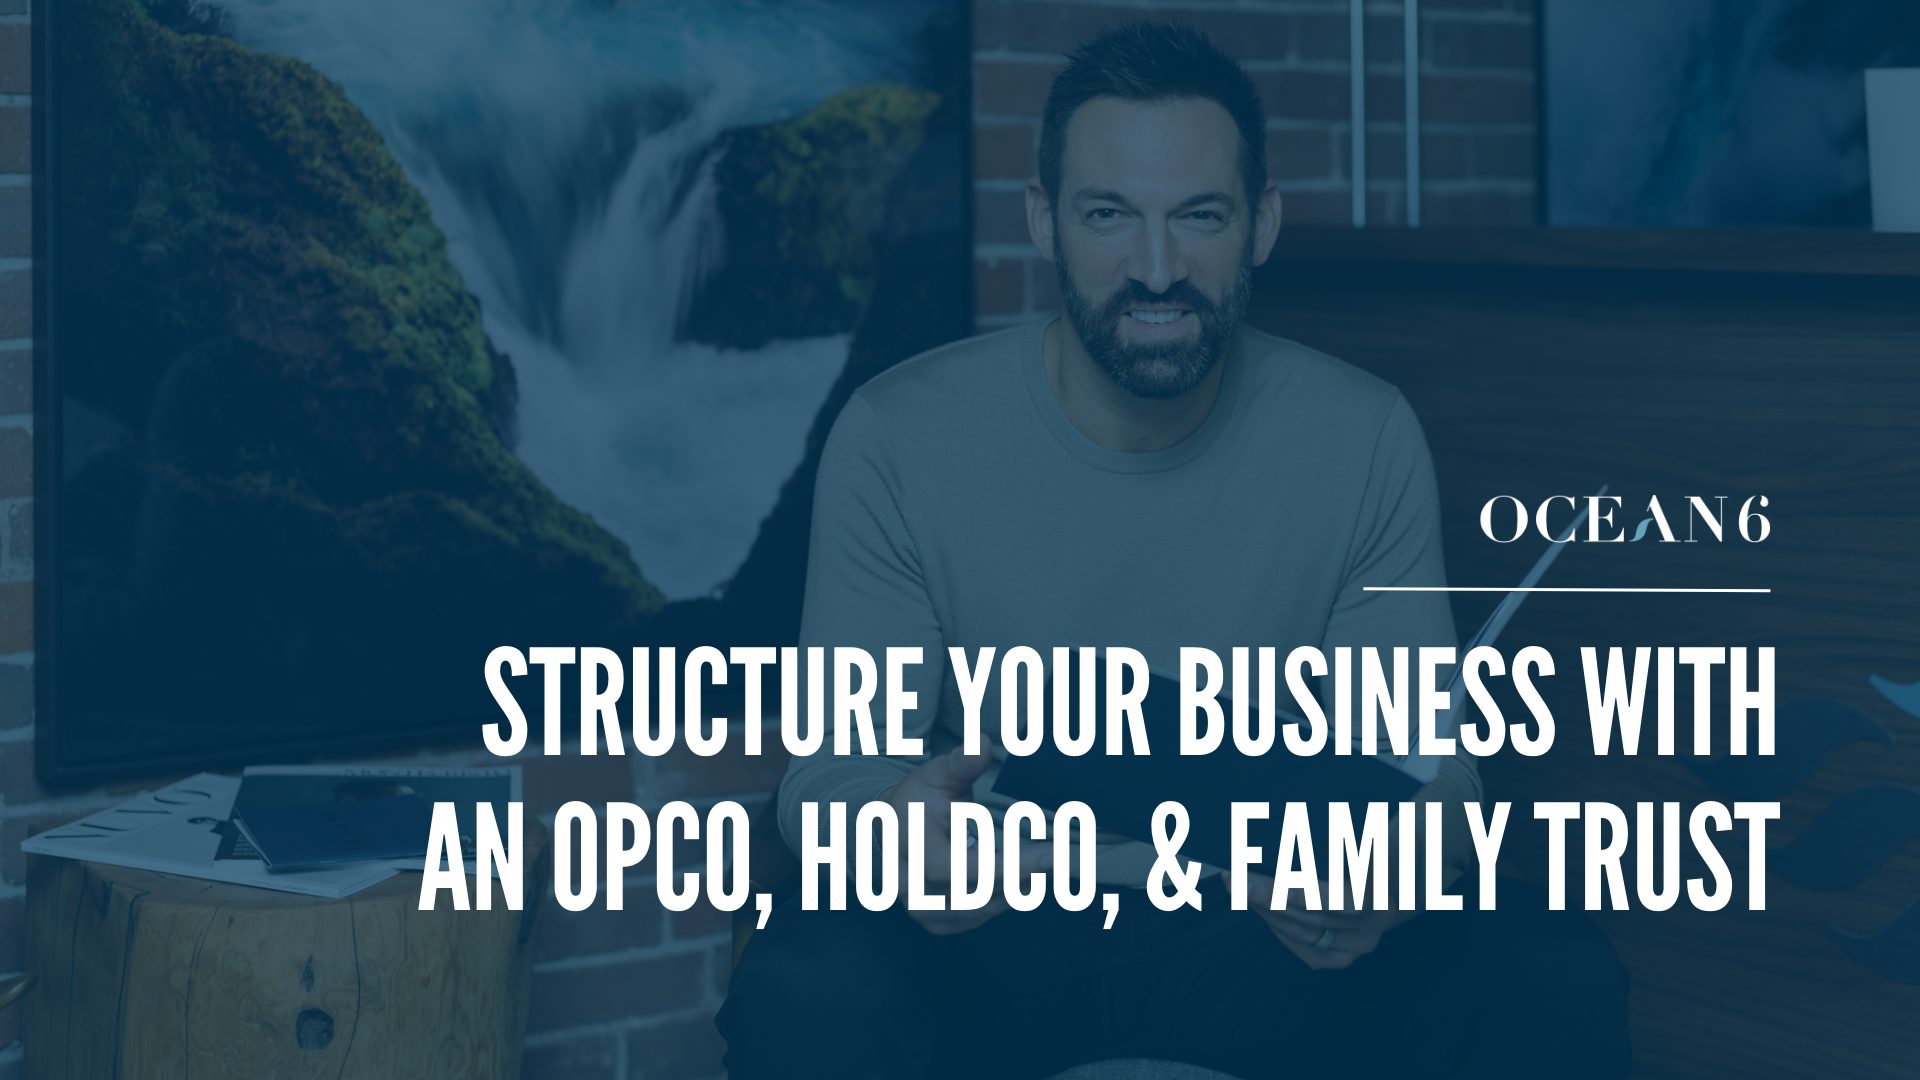 blog thumbnail with financial advisor sitting on a chair and holding a folder, smiling. The Difference Between an Operating Company, Holding Company, and Family Trust